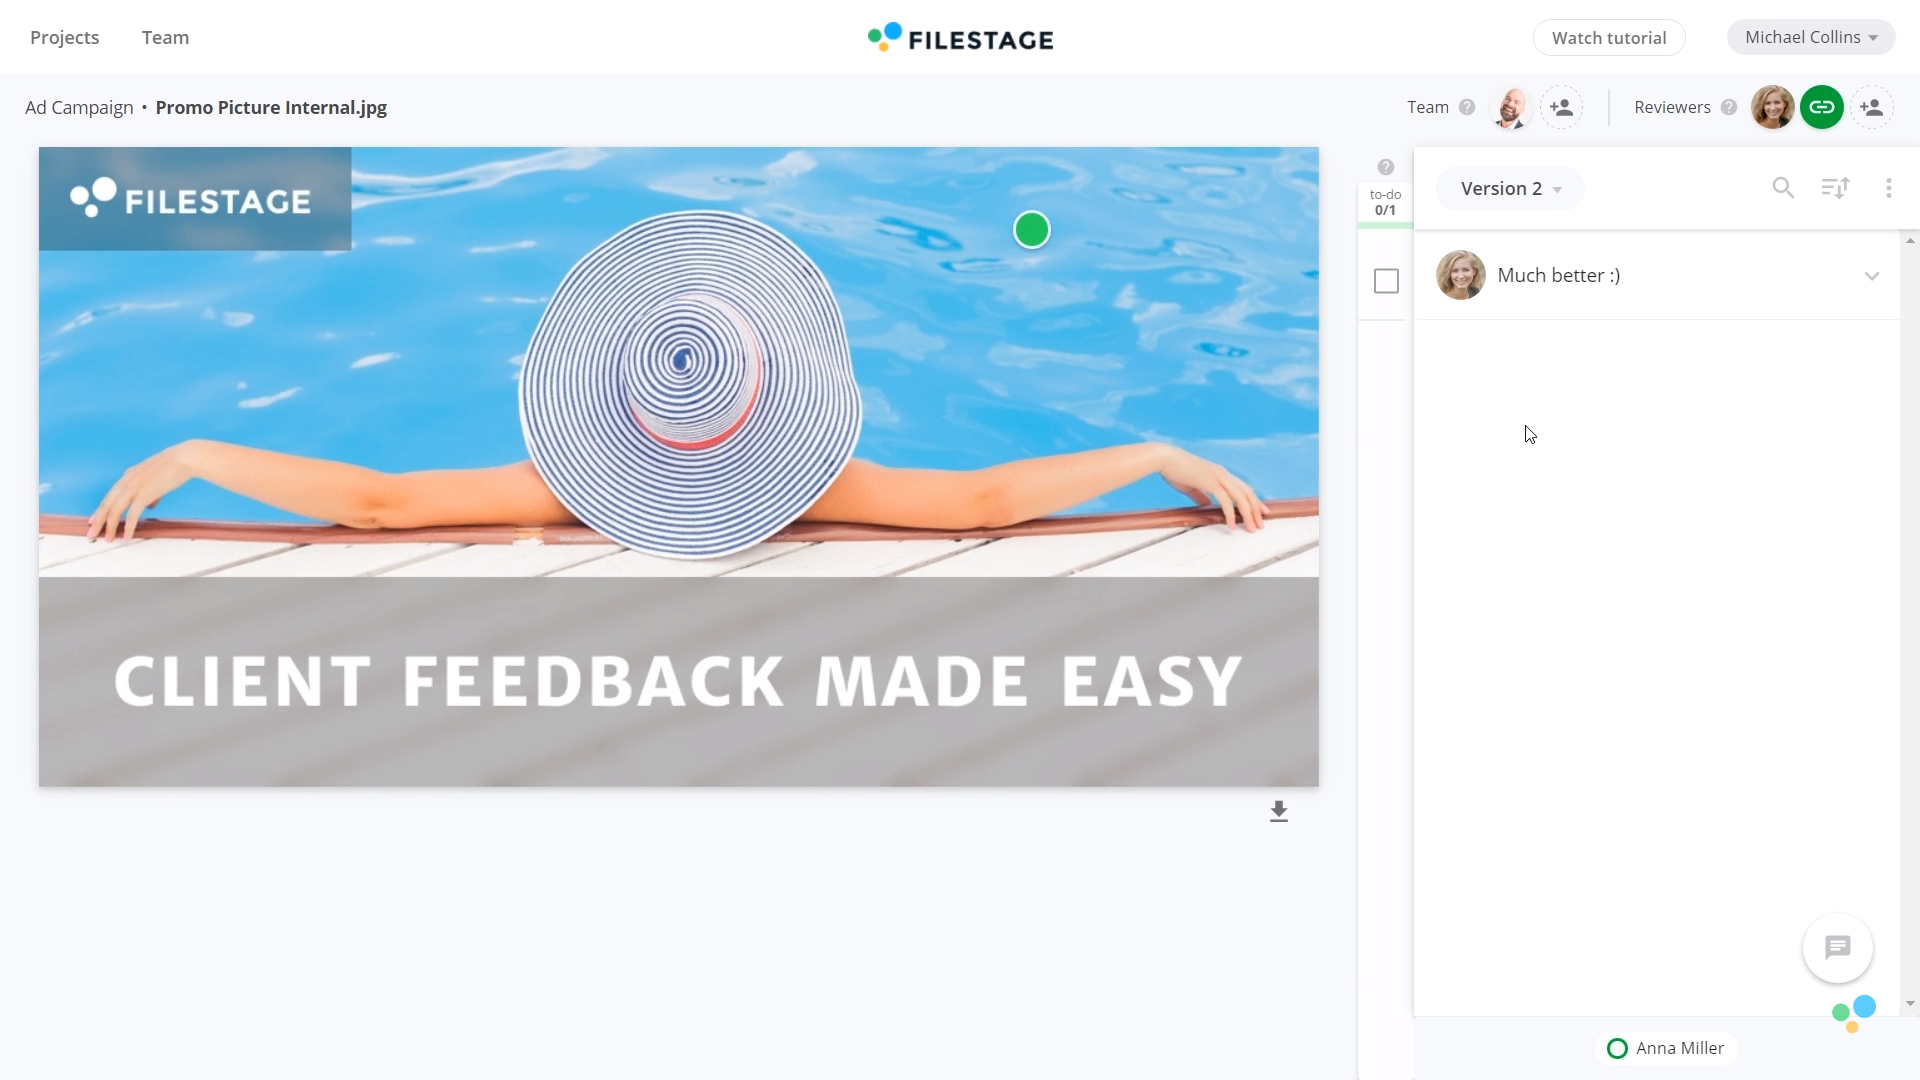 Filestage Software - Share Improved Versions Based on Client Feedback